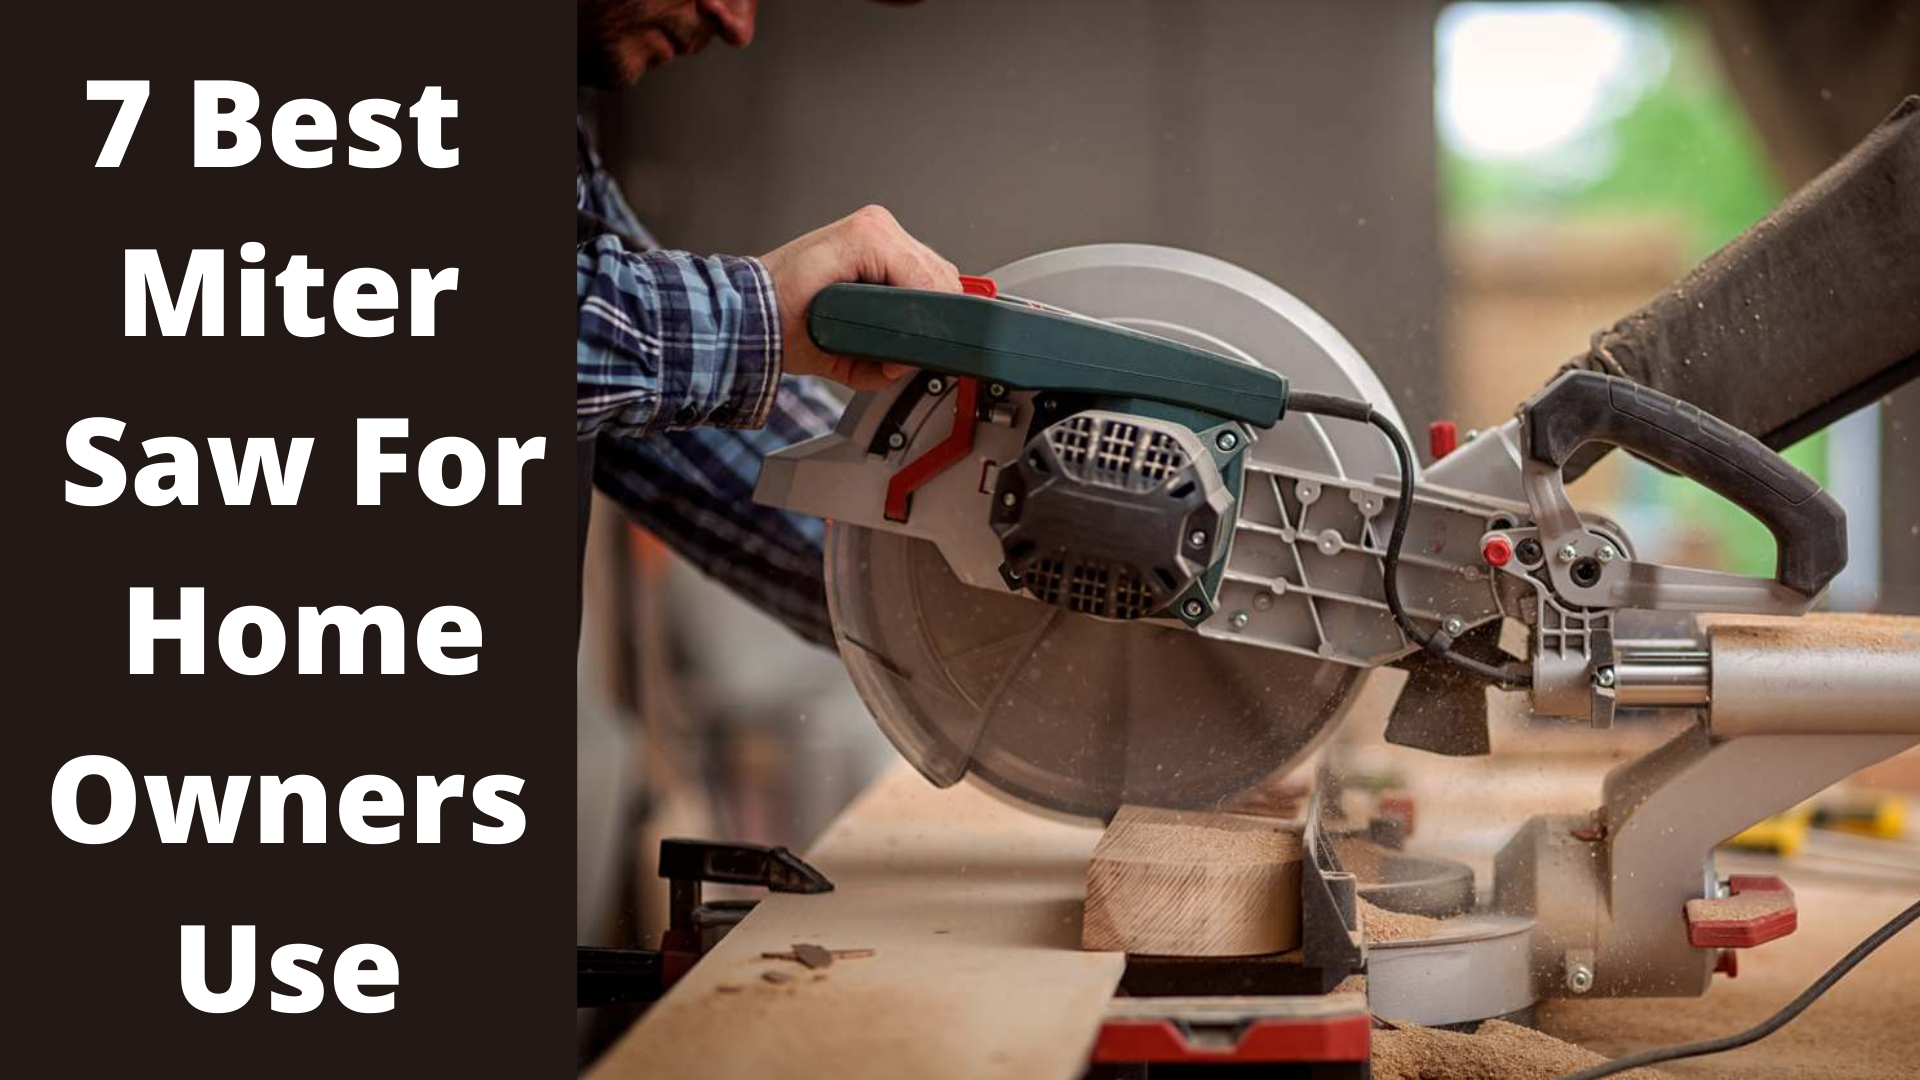 7 Best Miter Saw For Home owners use